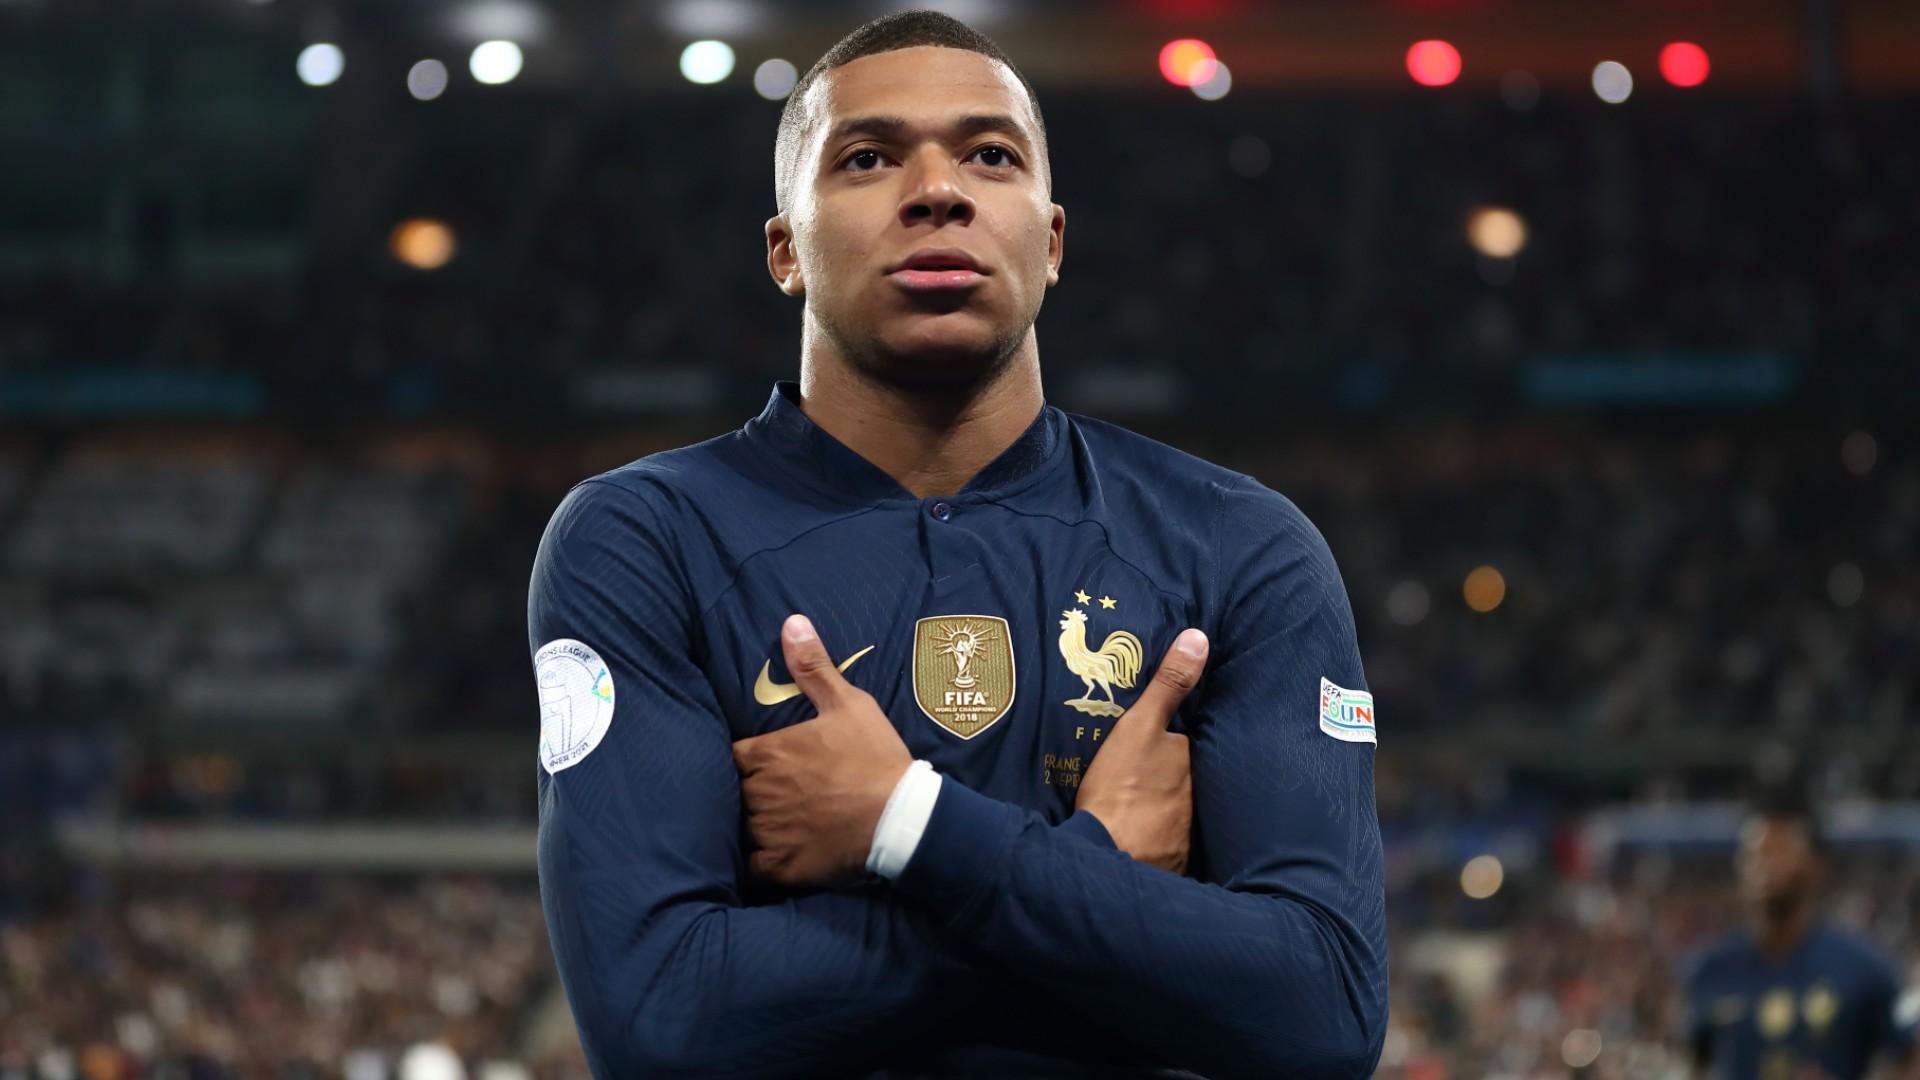 PSG Star Kylian Mbappe urges  end to violent riots in France follwing the death of teenager Nahel M in a alleged police shooting